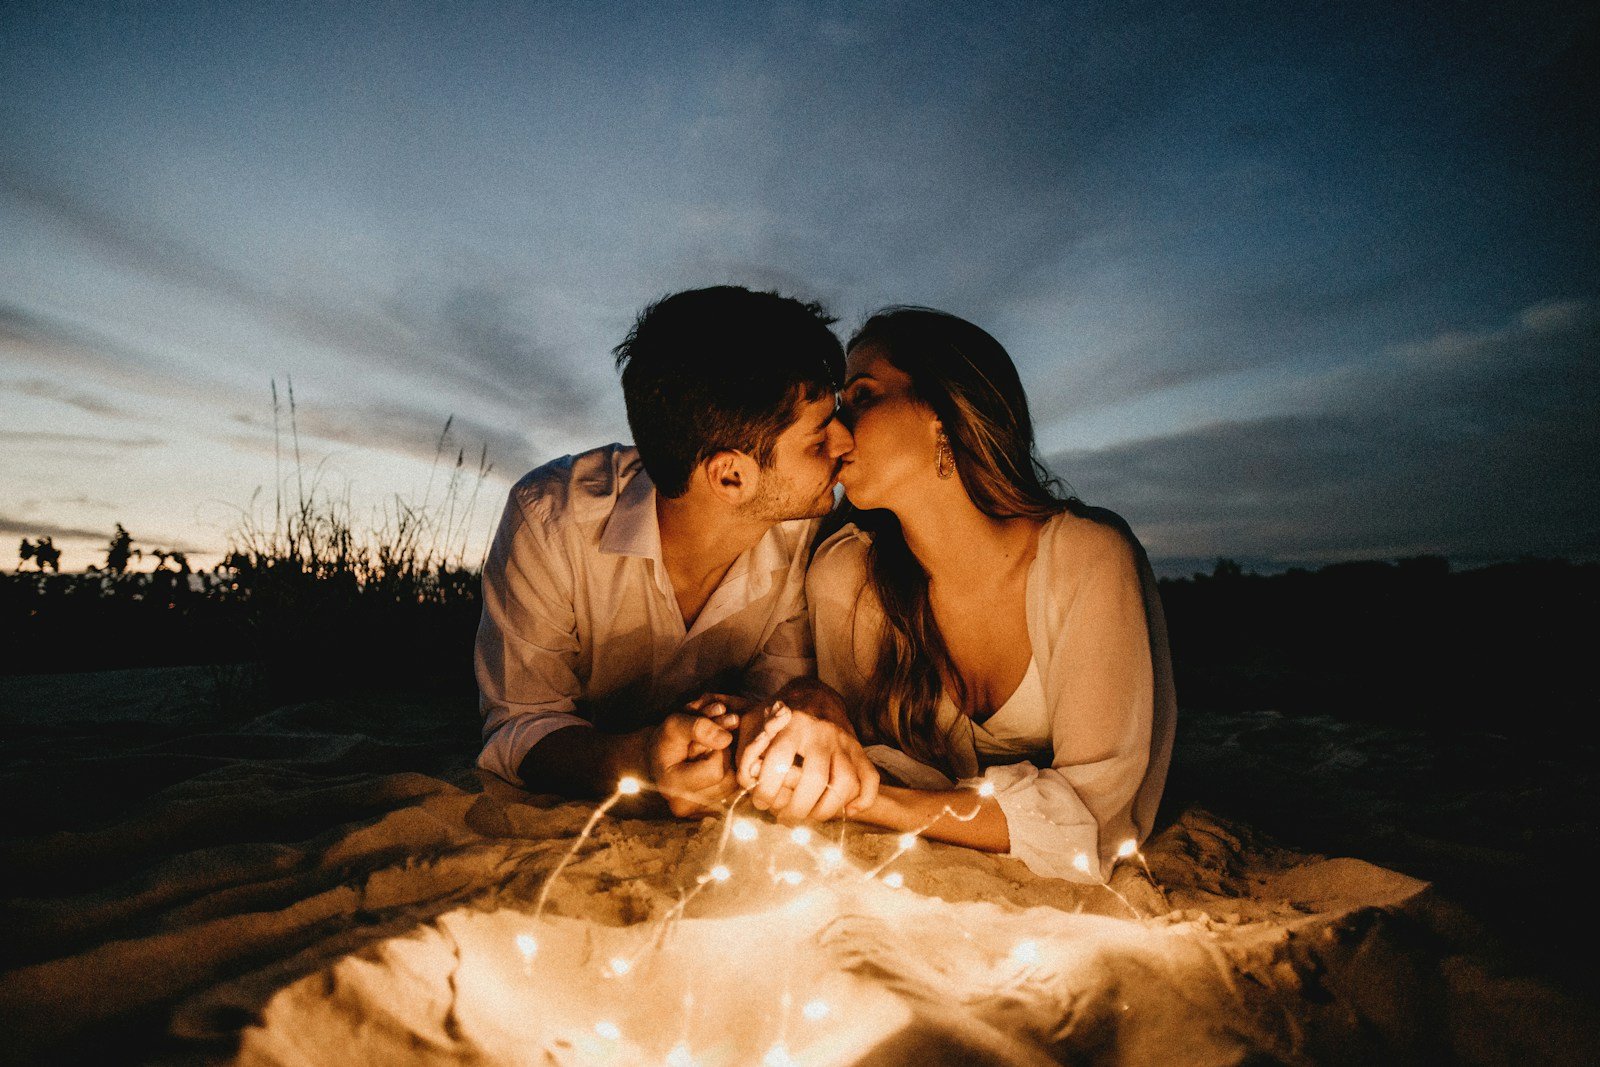 Regalos de San Valentín en Colombia, man and woman kissing on brown sand during night time